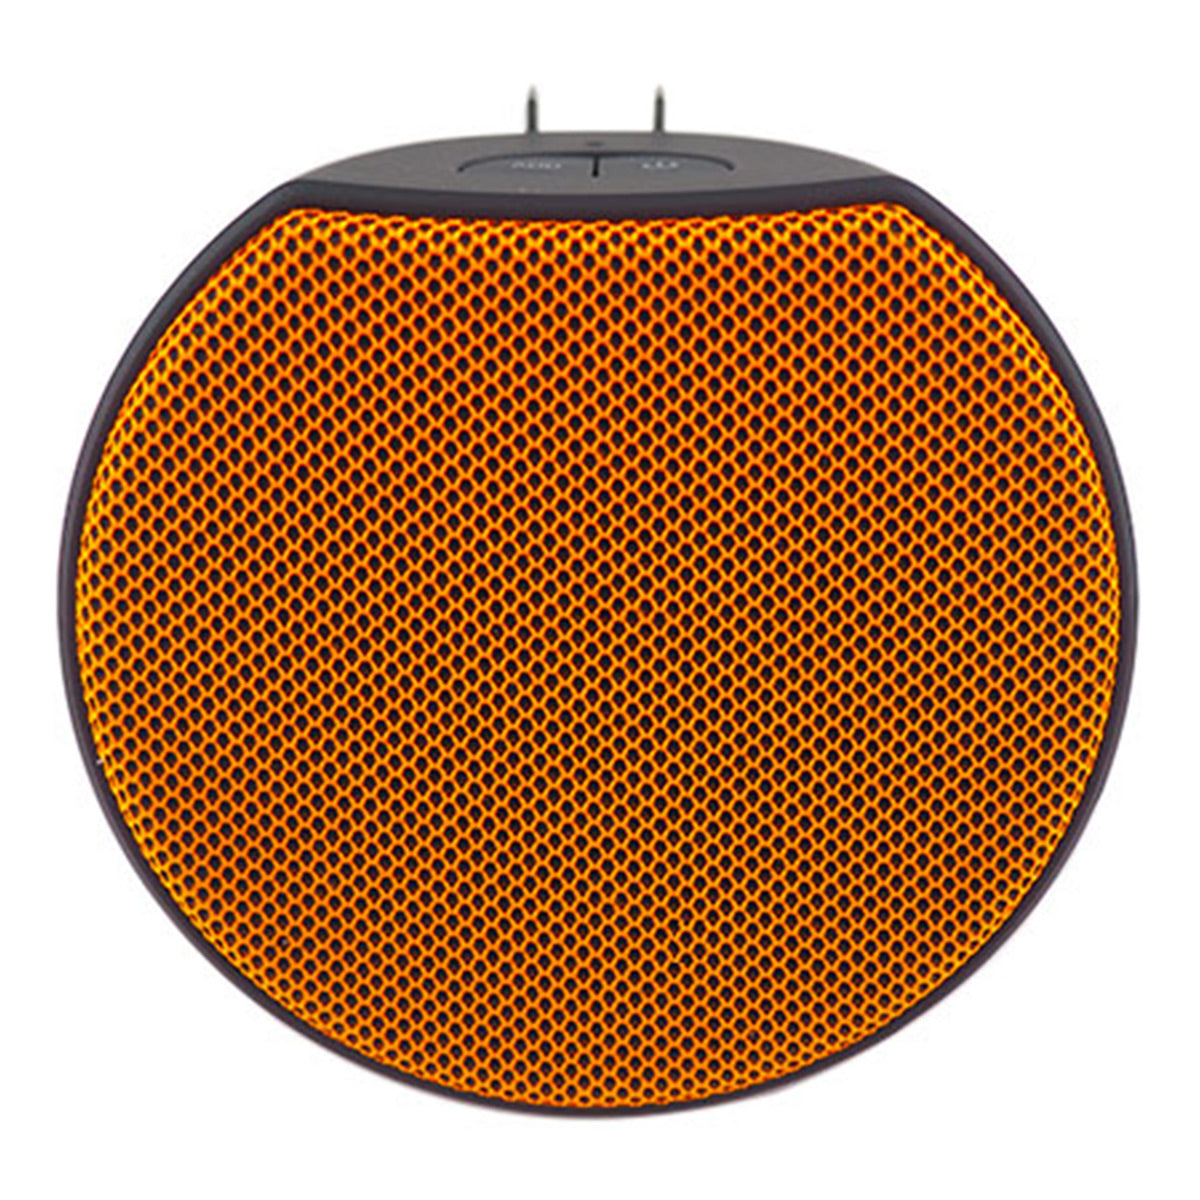 OC Acoustic Newport Plug-in Outlet Speaker with Bluetooth 5.1 and Built-in USB Type-A Charging Port - Set of 4 (Orange/Black)